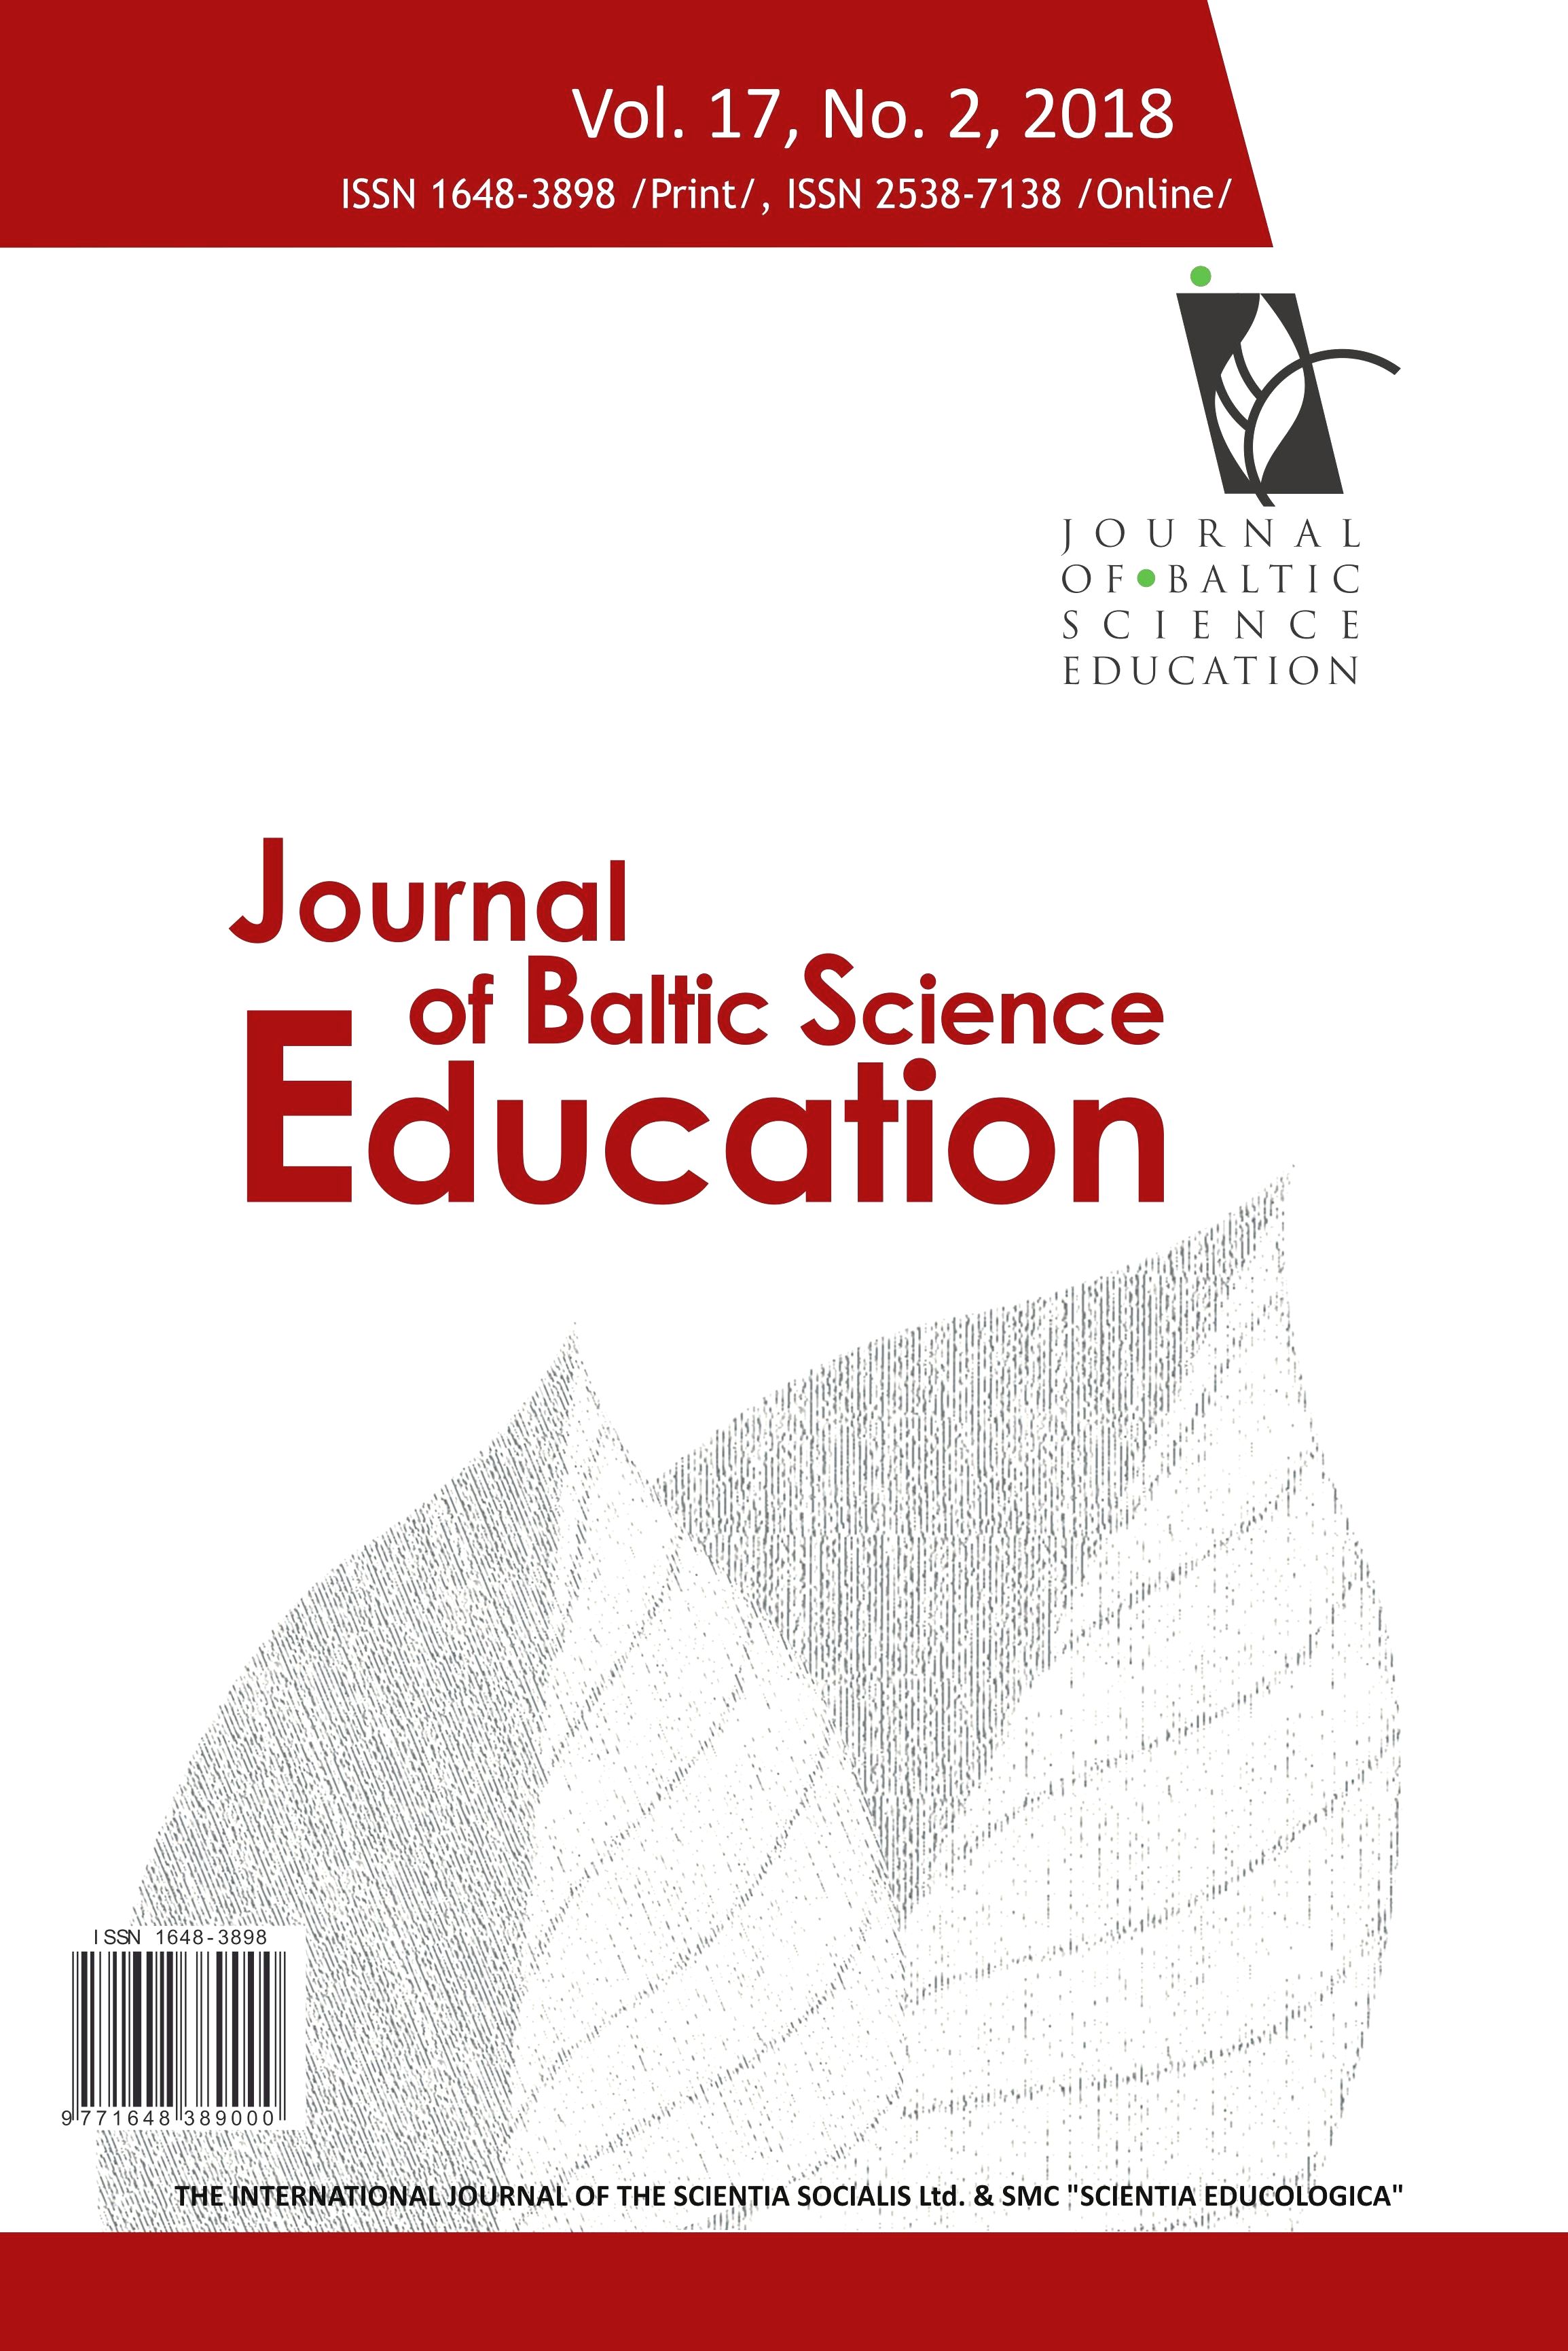 SCIENCE EDUCATION IN SCHOOLS AND AT TERTIARY LEVEL: STATUS QUO OR EMBRACING CHANGE?